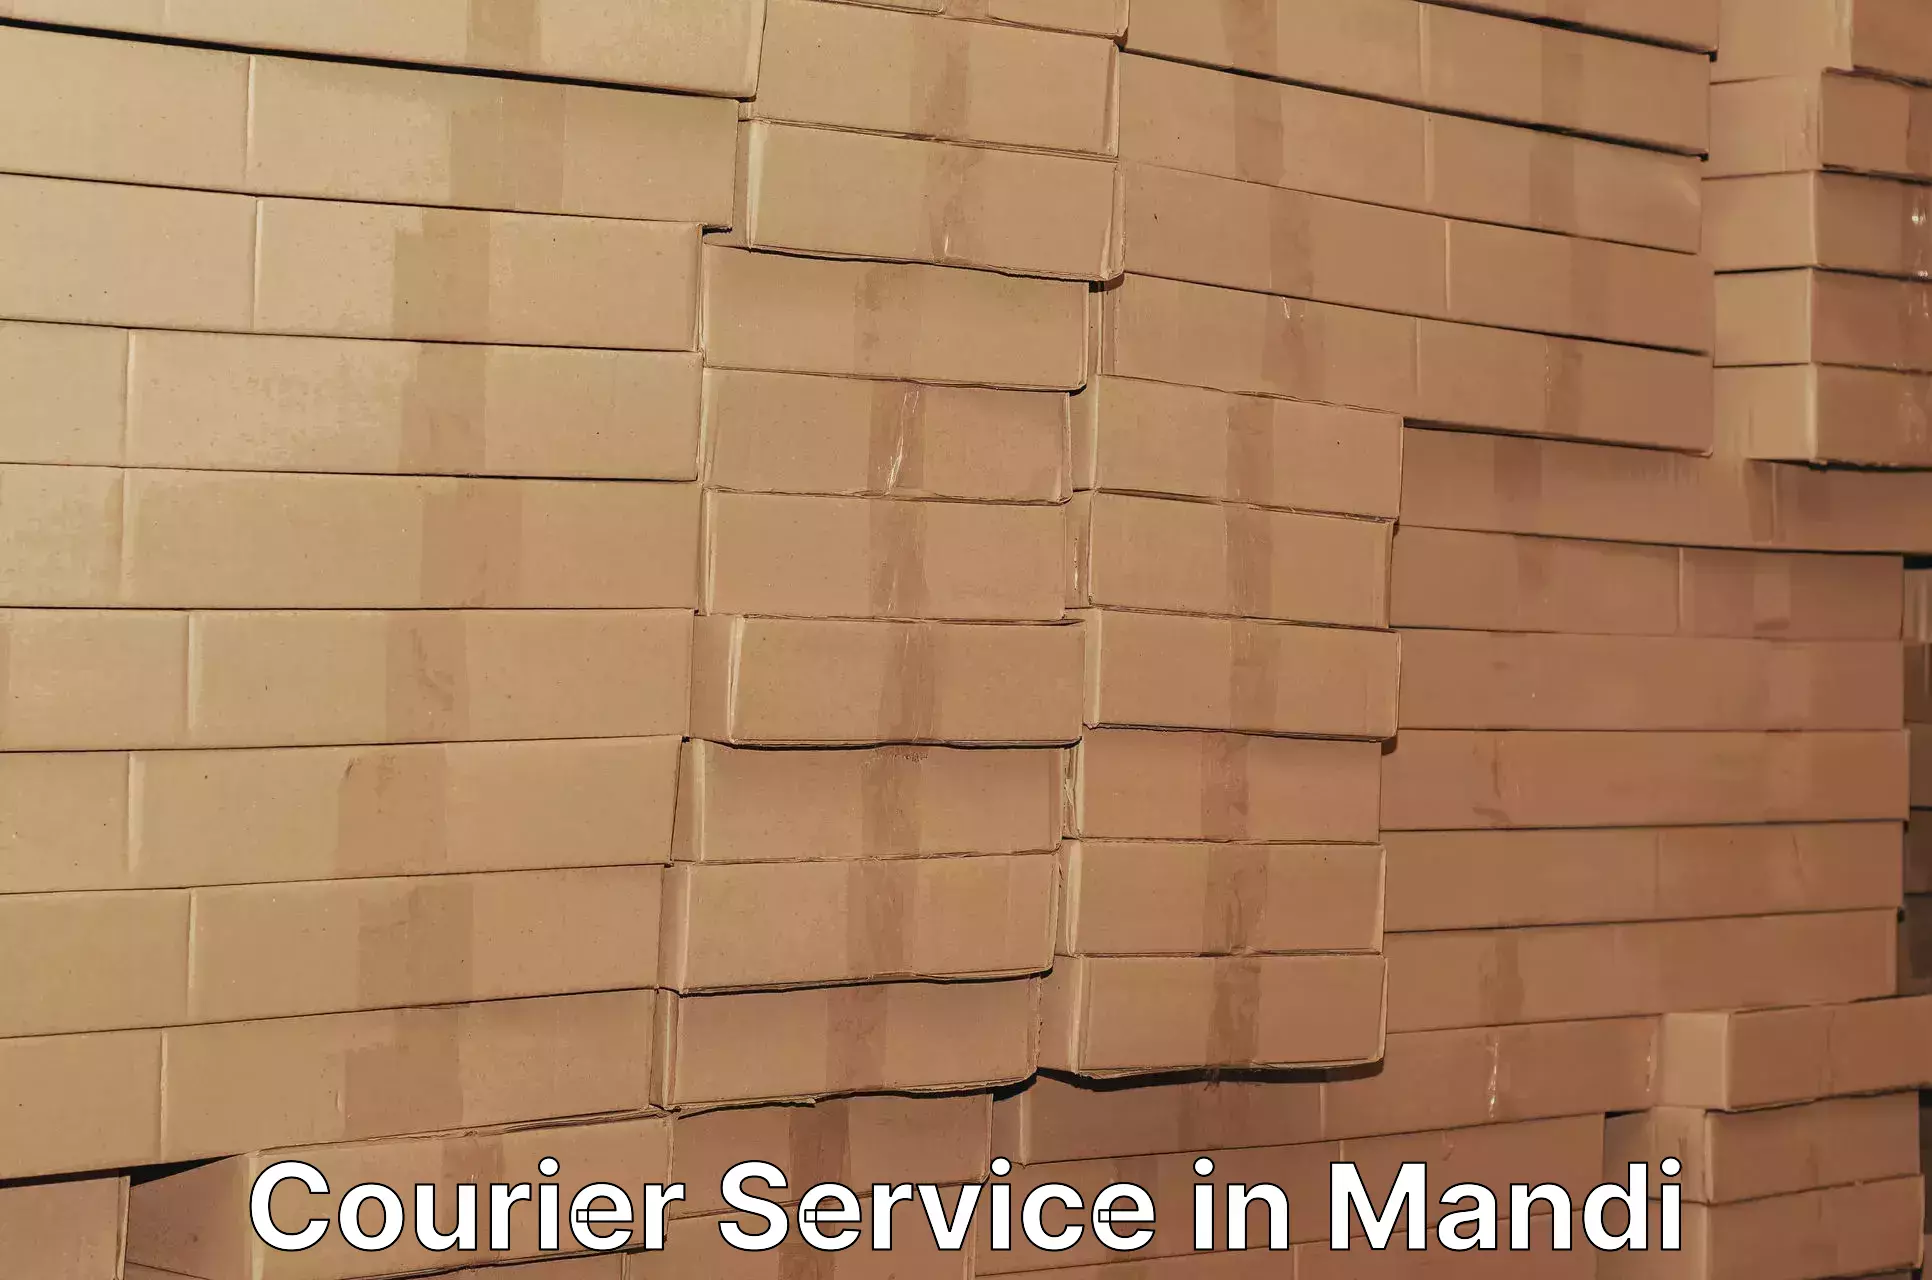 Courier service innovation in Mandi